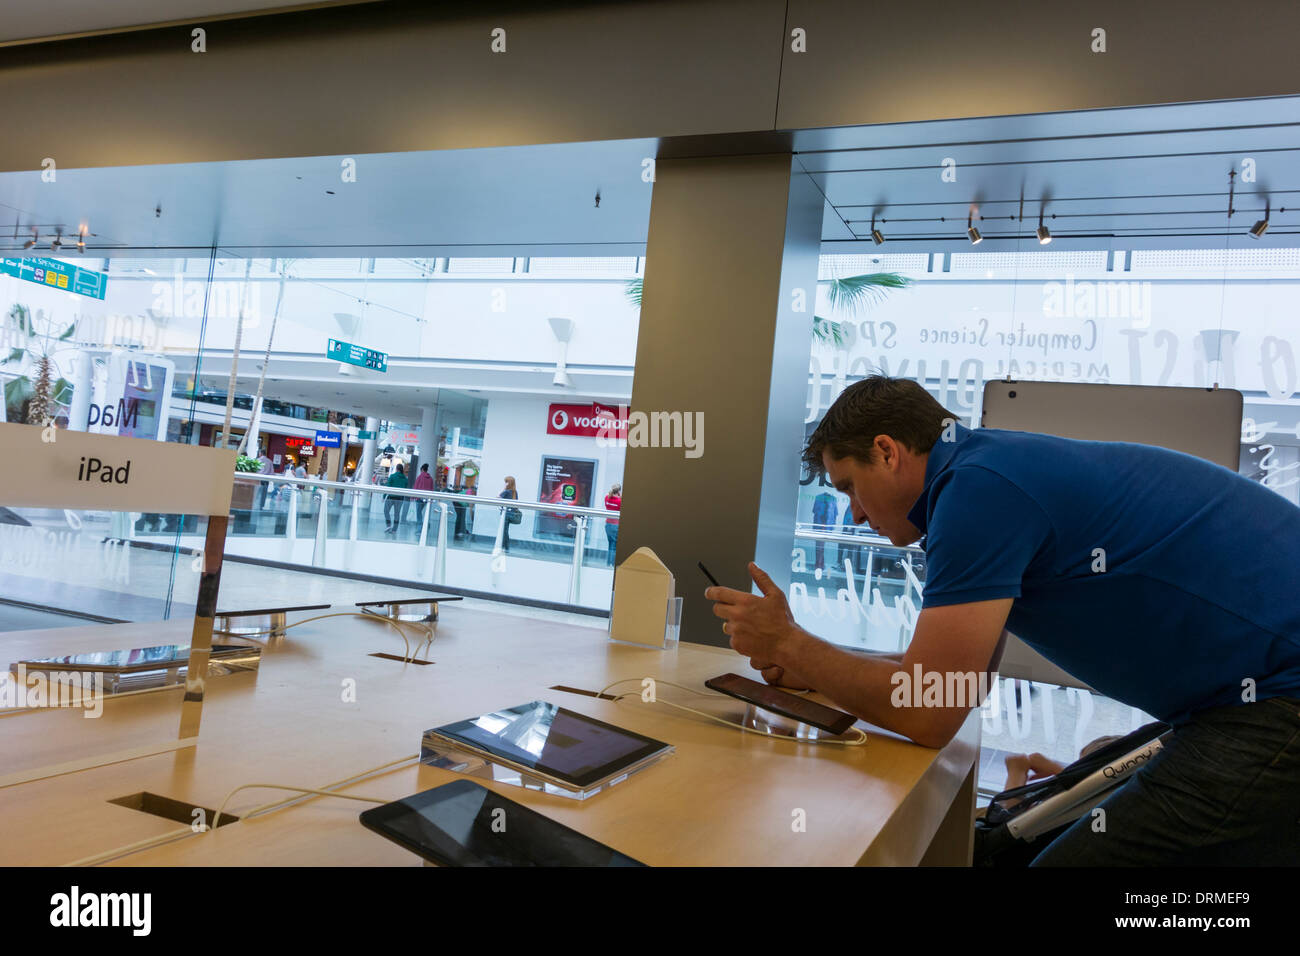 A young man using a iPad in Apple Store in The Mall at Cribbs Causeway, Bristol, UK Stock Photo